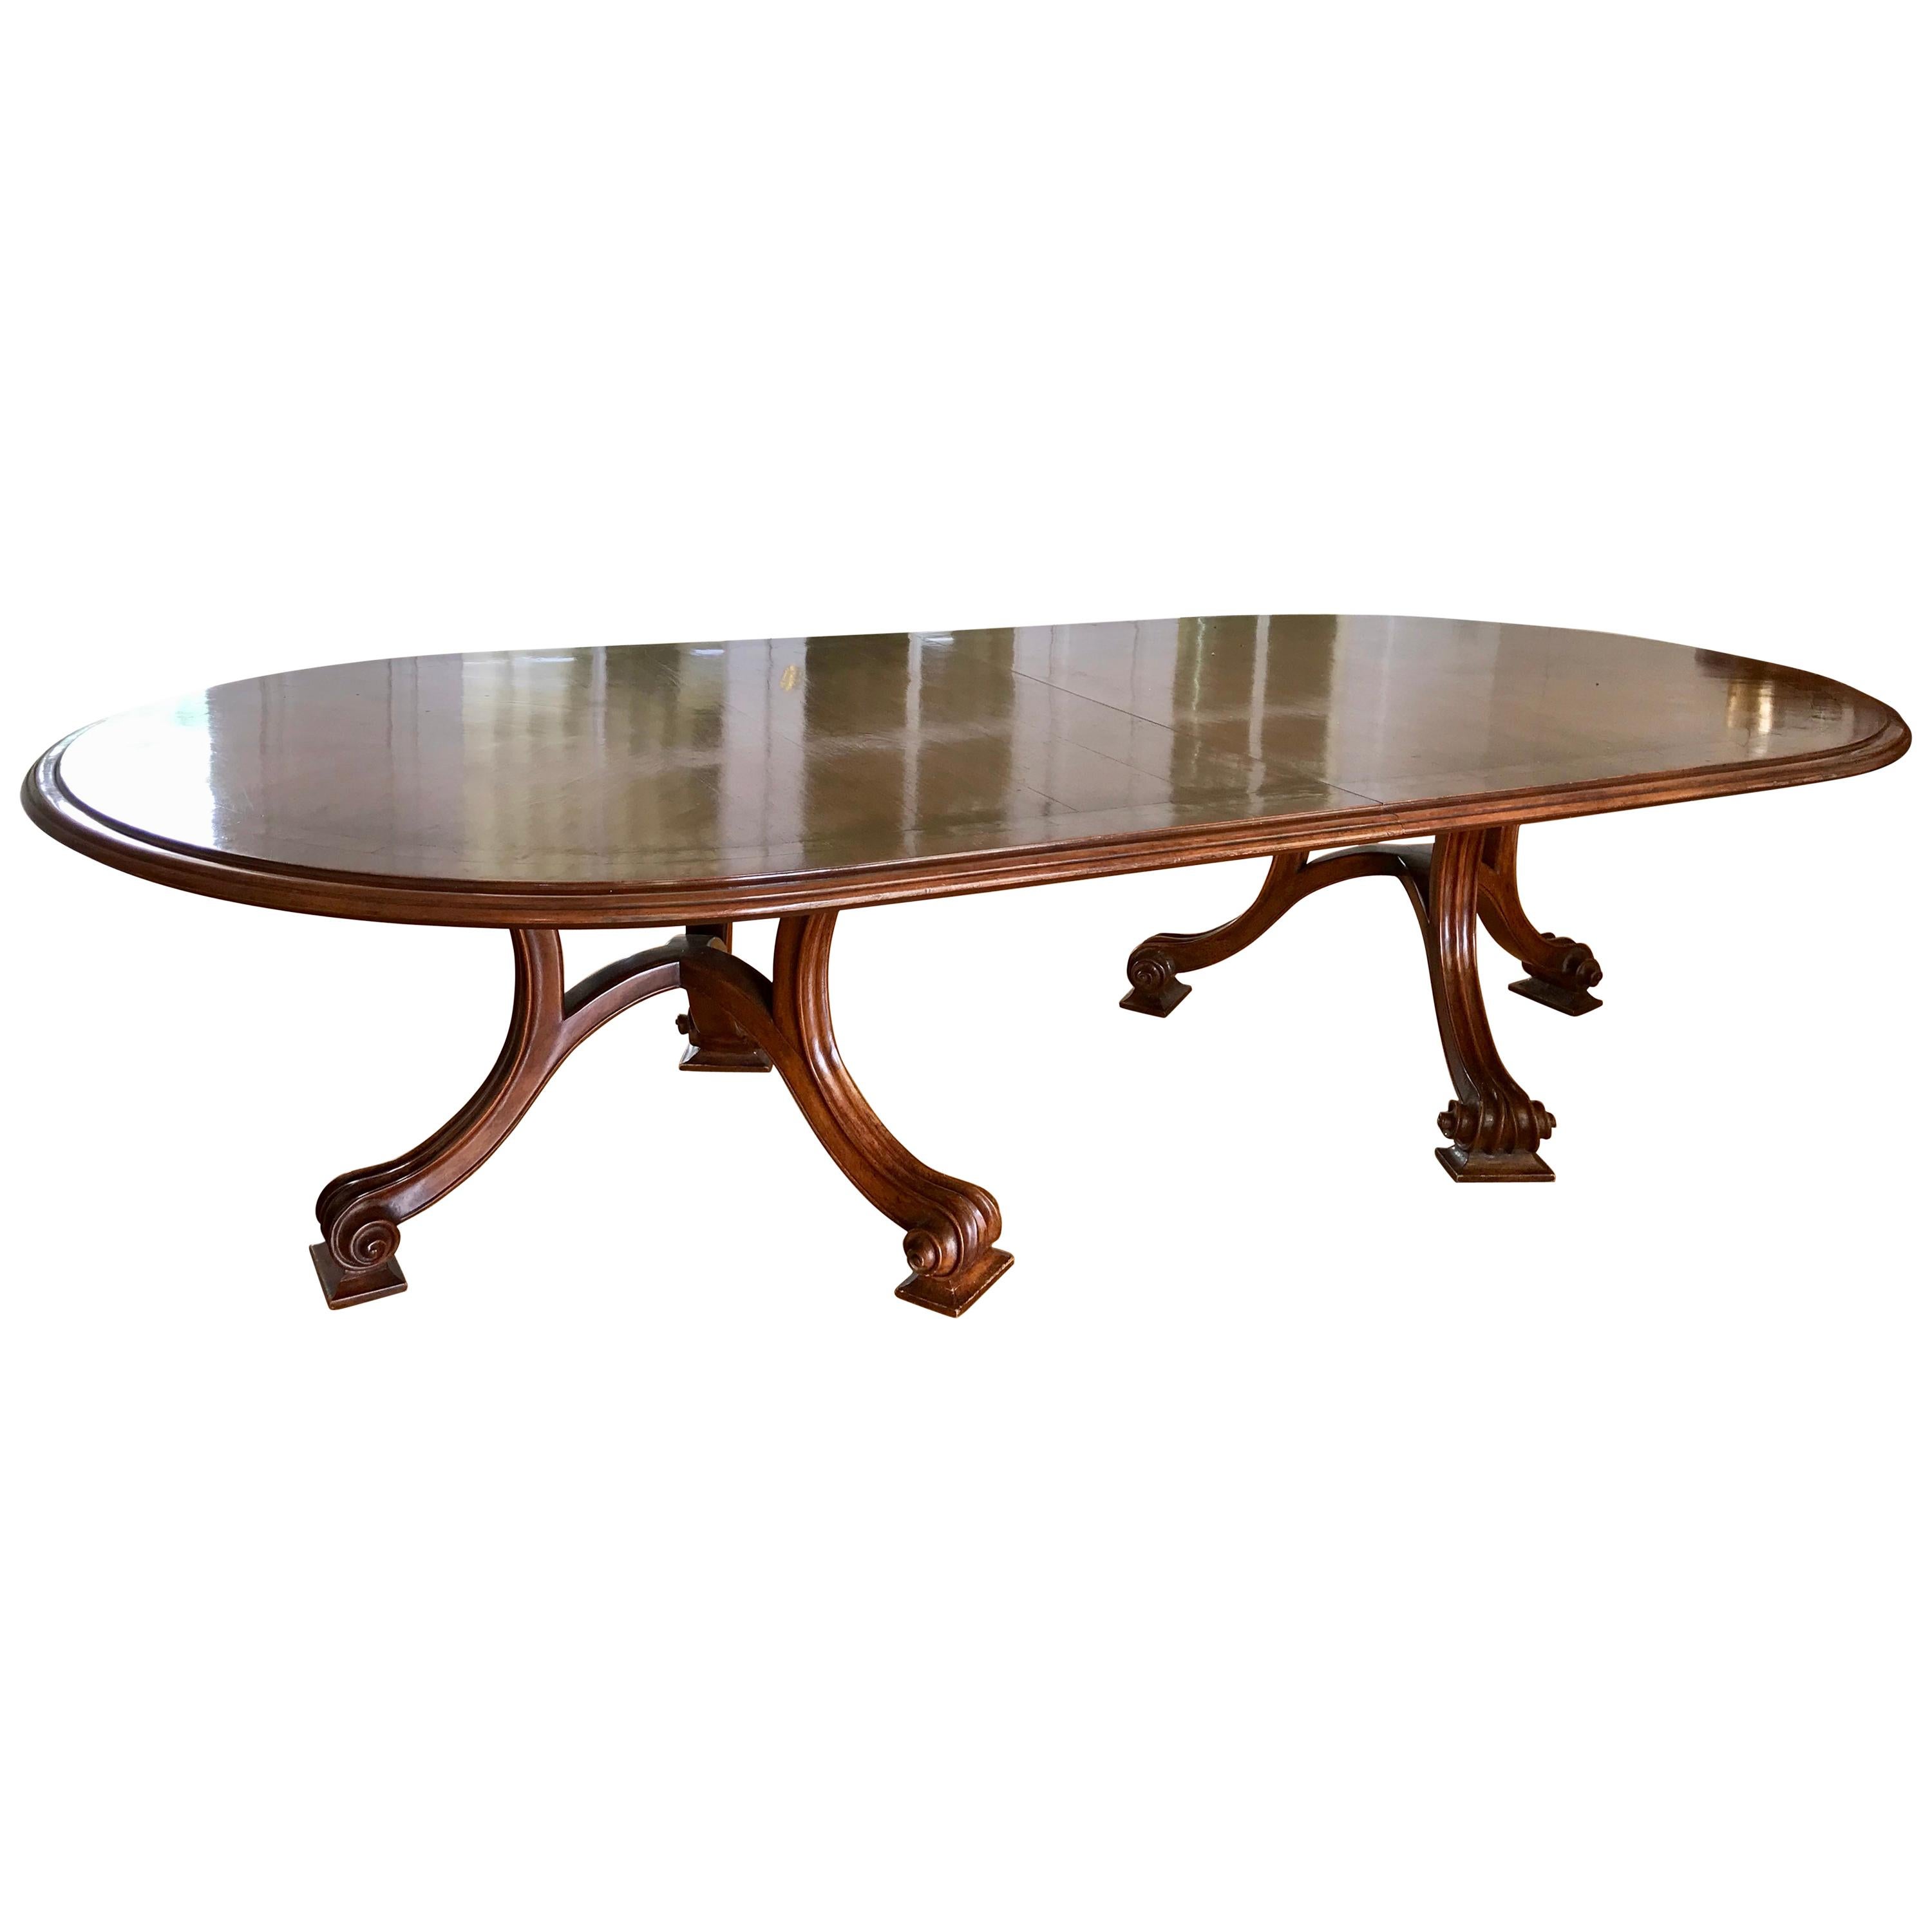 Banquet Dining Table by Therien Studio Workshops